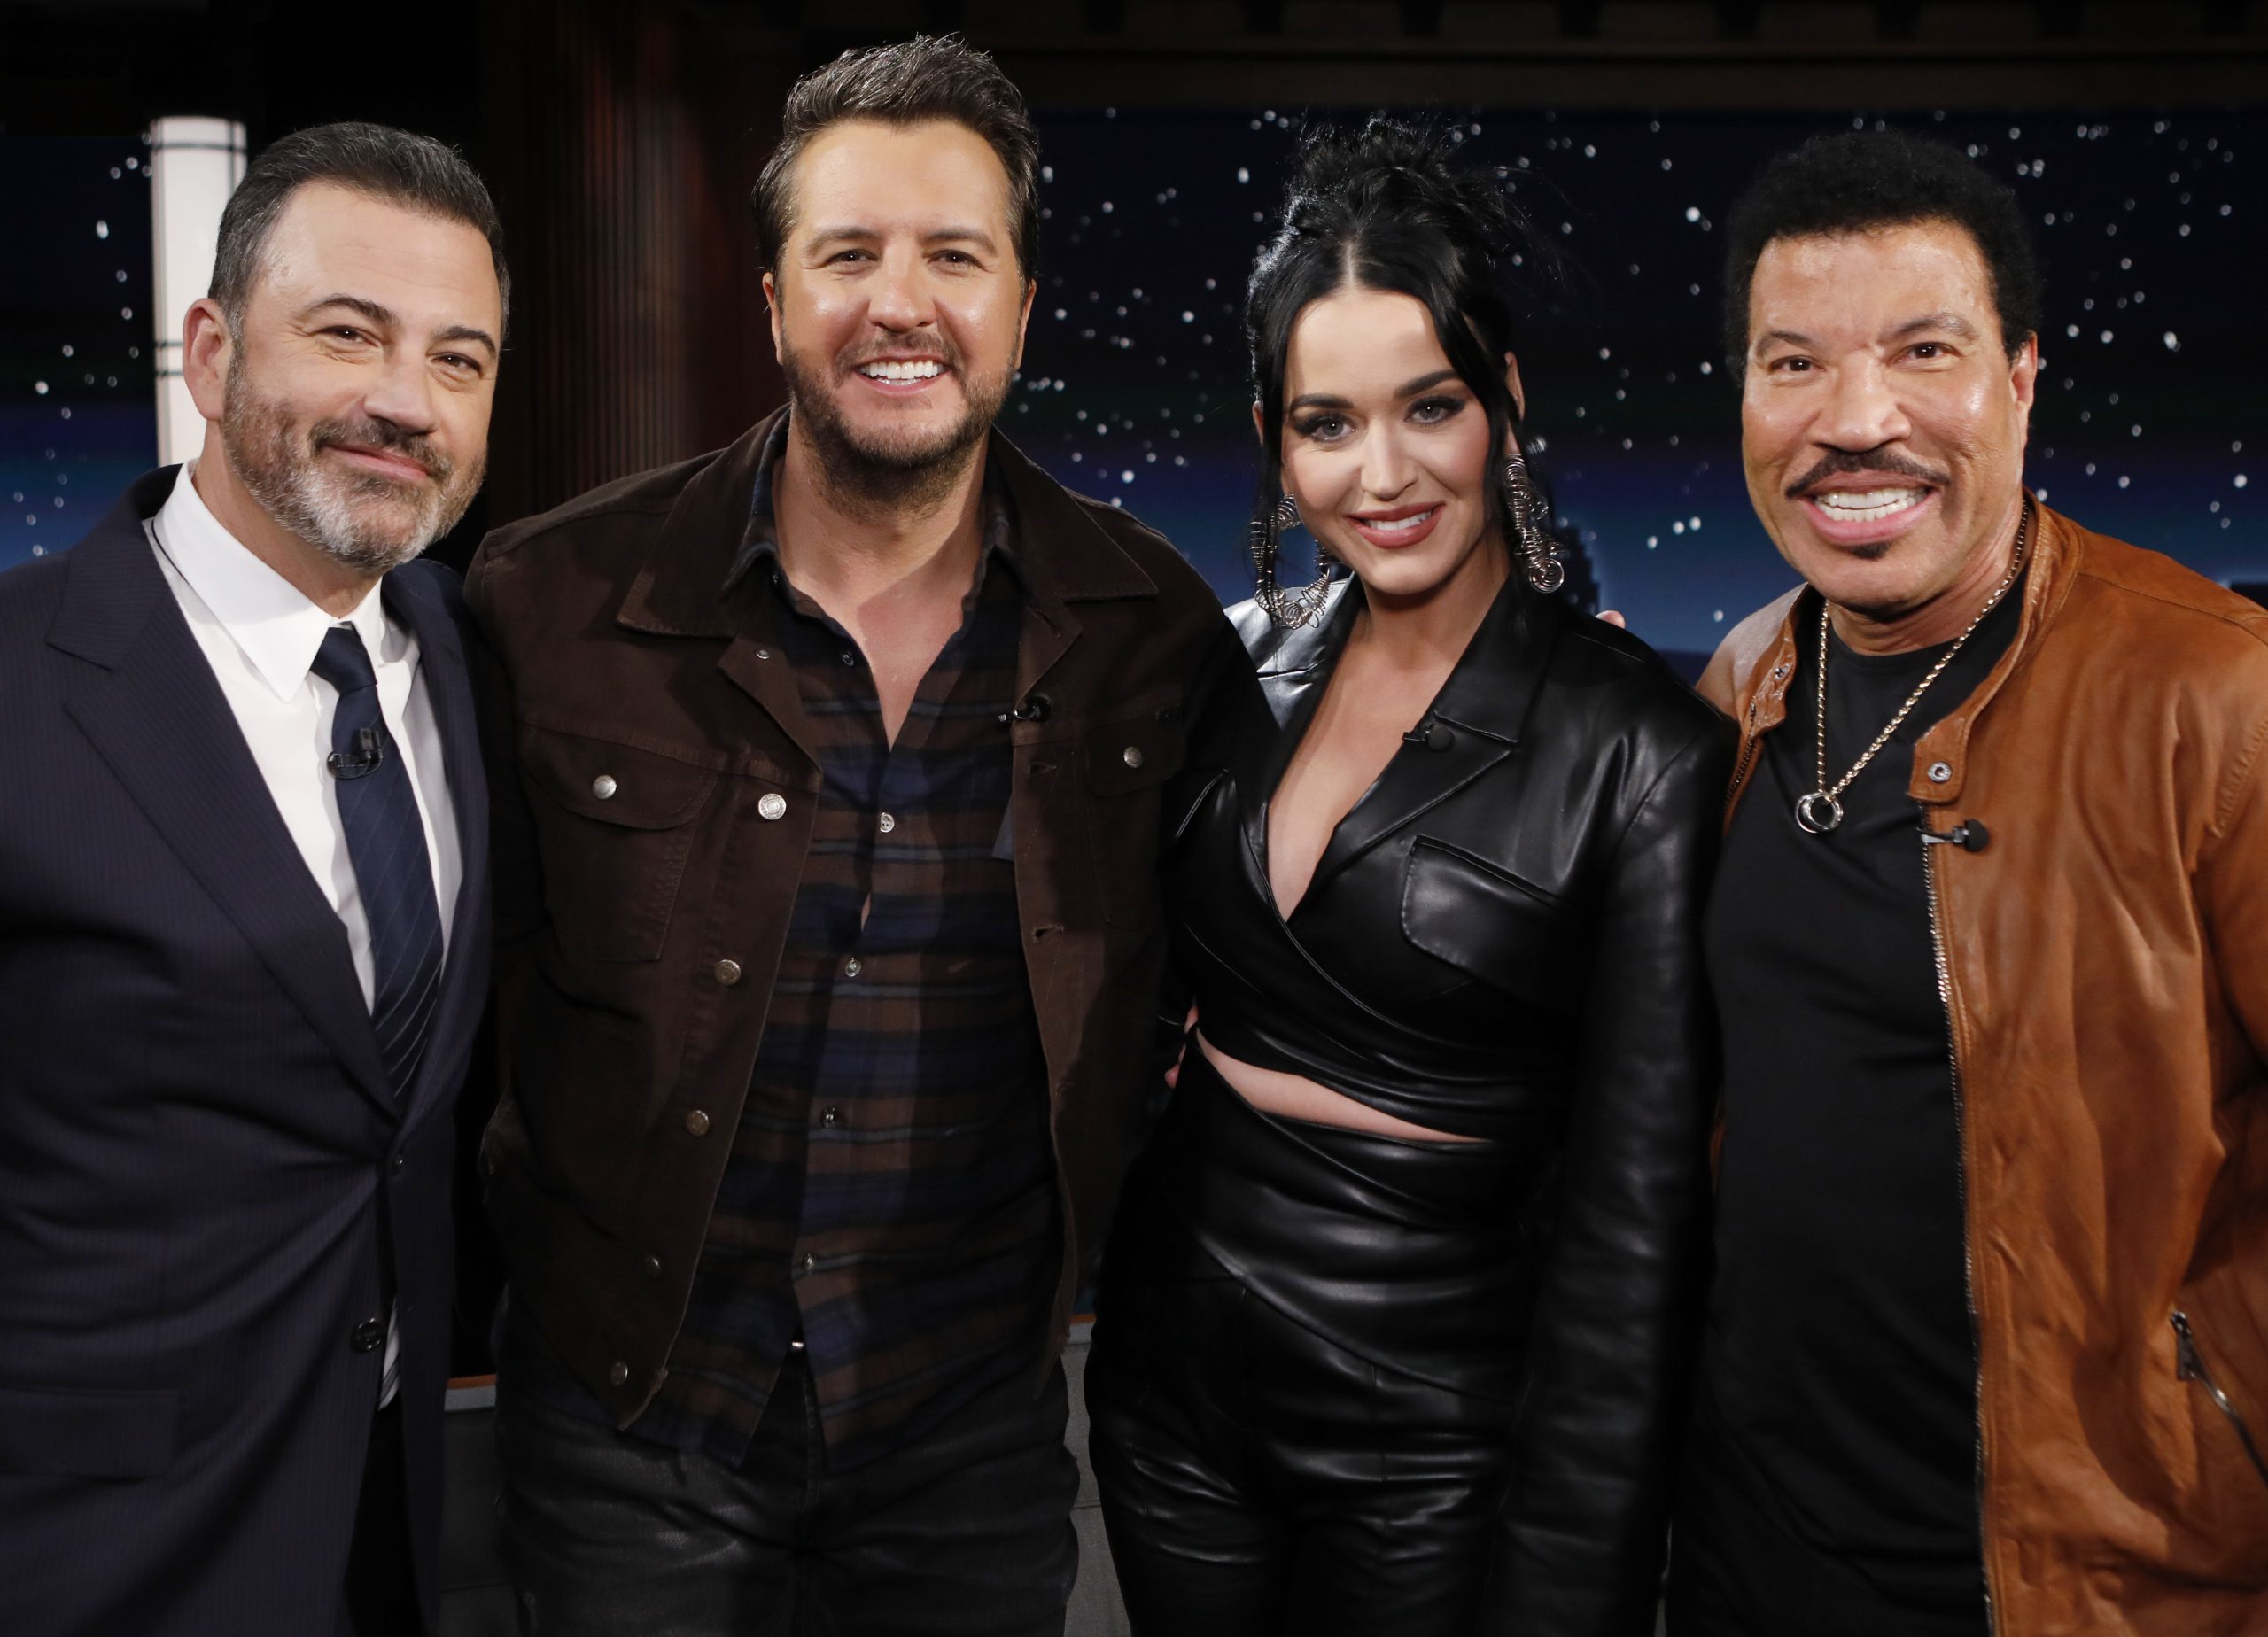 In Case You Missed It: Katy Perry, Luke Bryan And Lionel Richie On ‘Jimmy Kimmel Live’